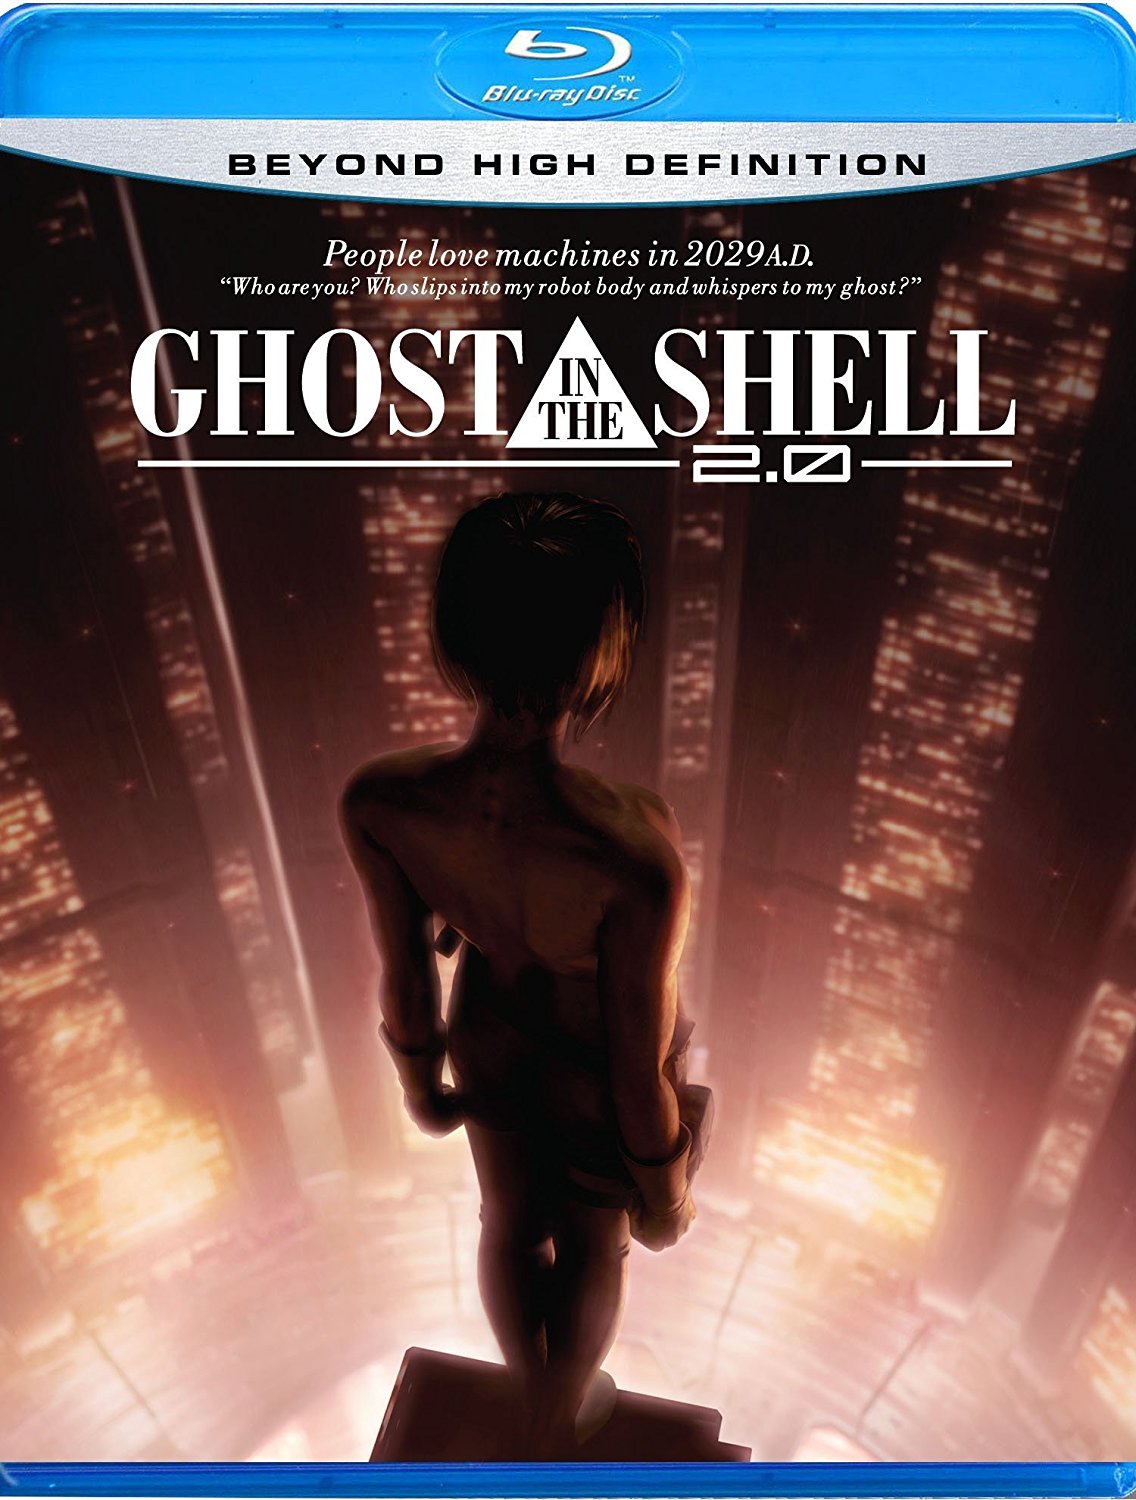 Ghost In The Shell 2.0 Backgrounds, Compatible - PC, Mobile, Gadgets| 1136x1500 px